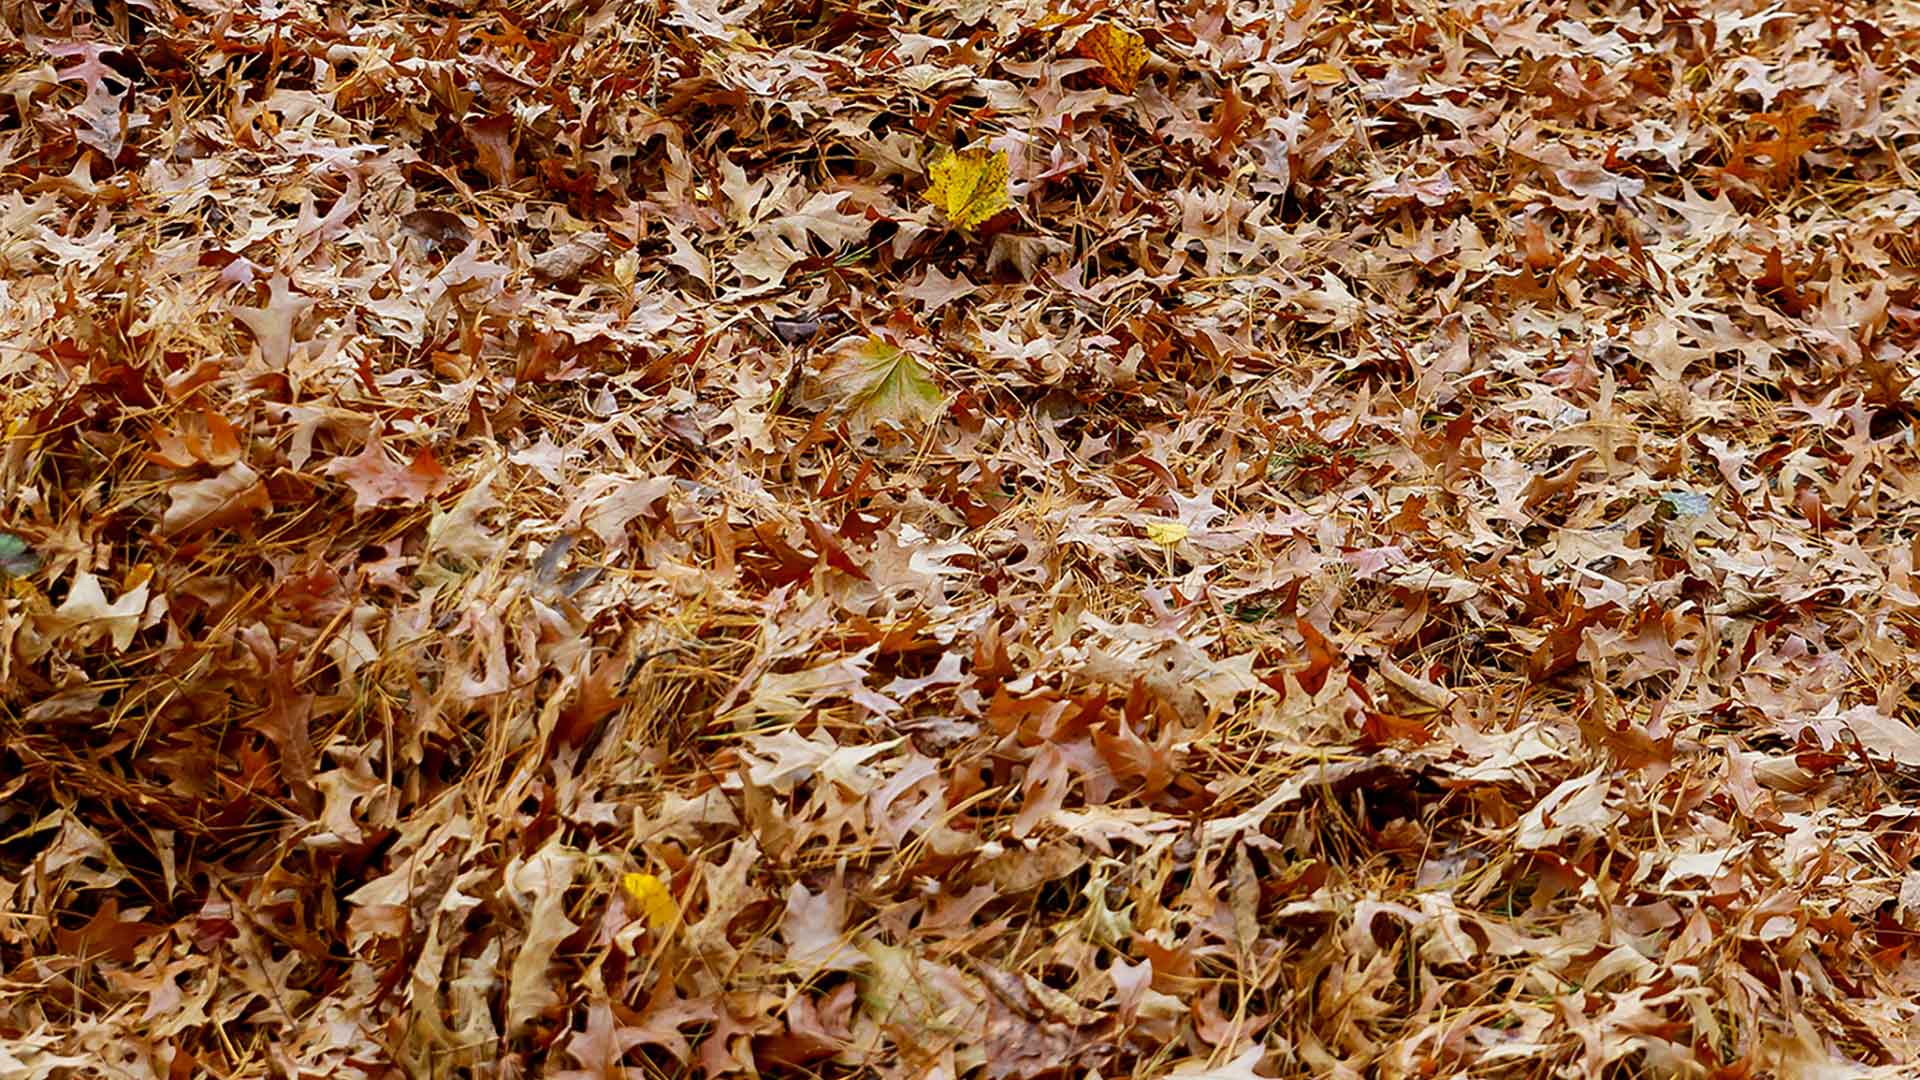 STOP! Don’t Burn the Leaf Piles on Your Lawn!